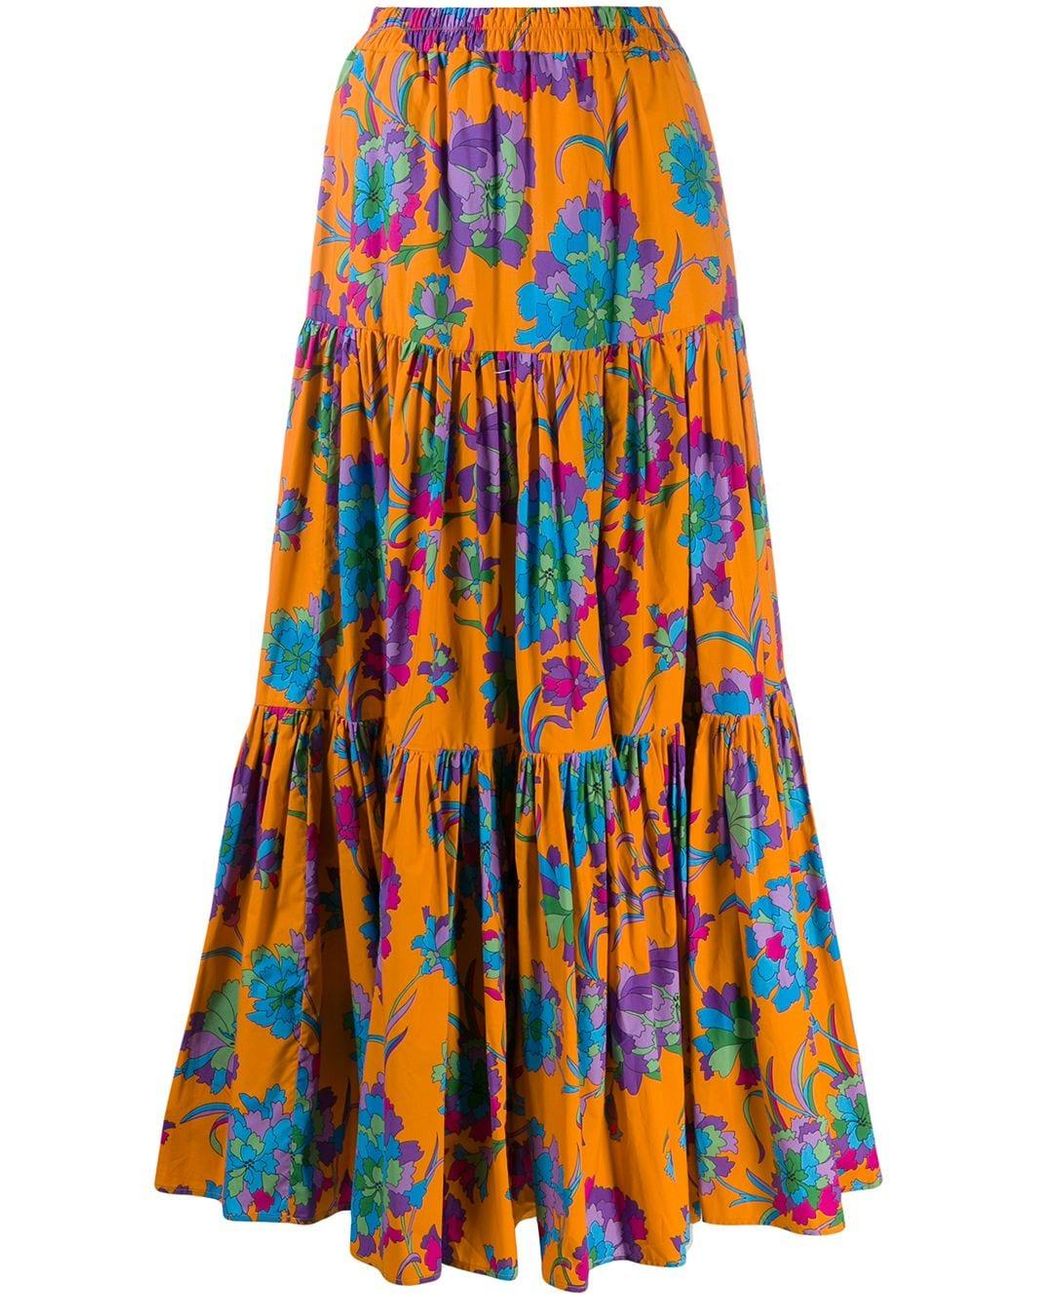 LaDoubleJ Printed Cotton Maxi Skirt in Orange - Save 15% - Lyst